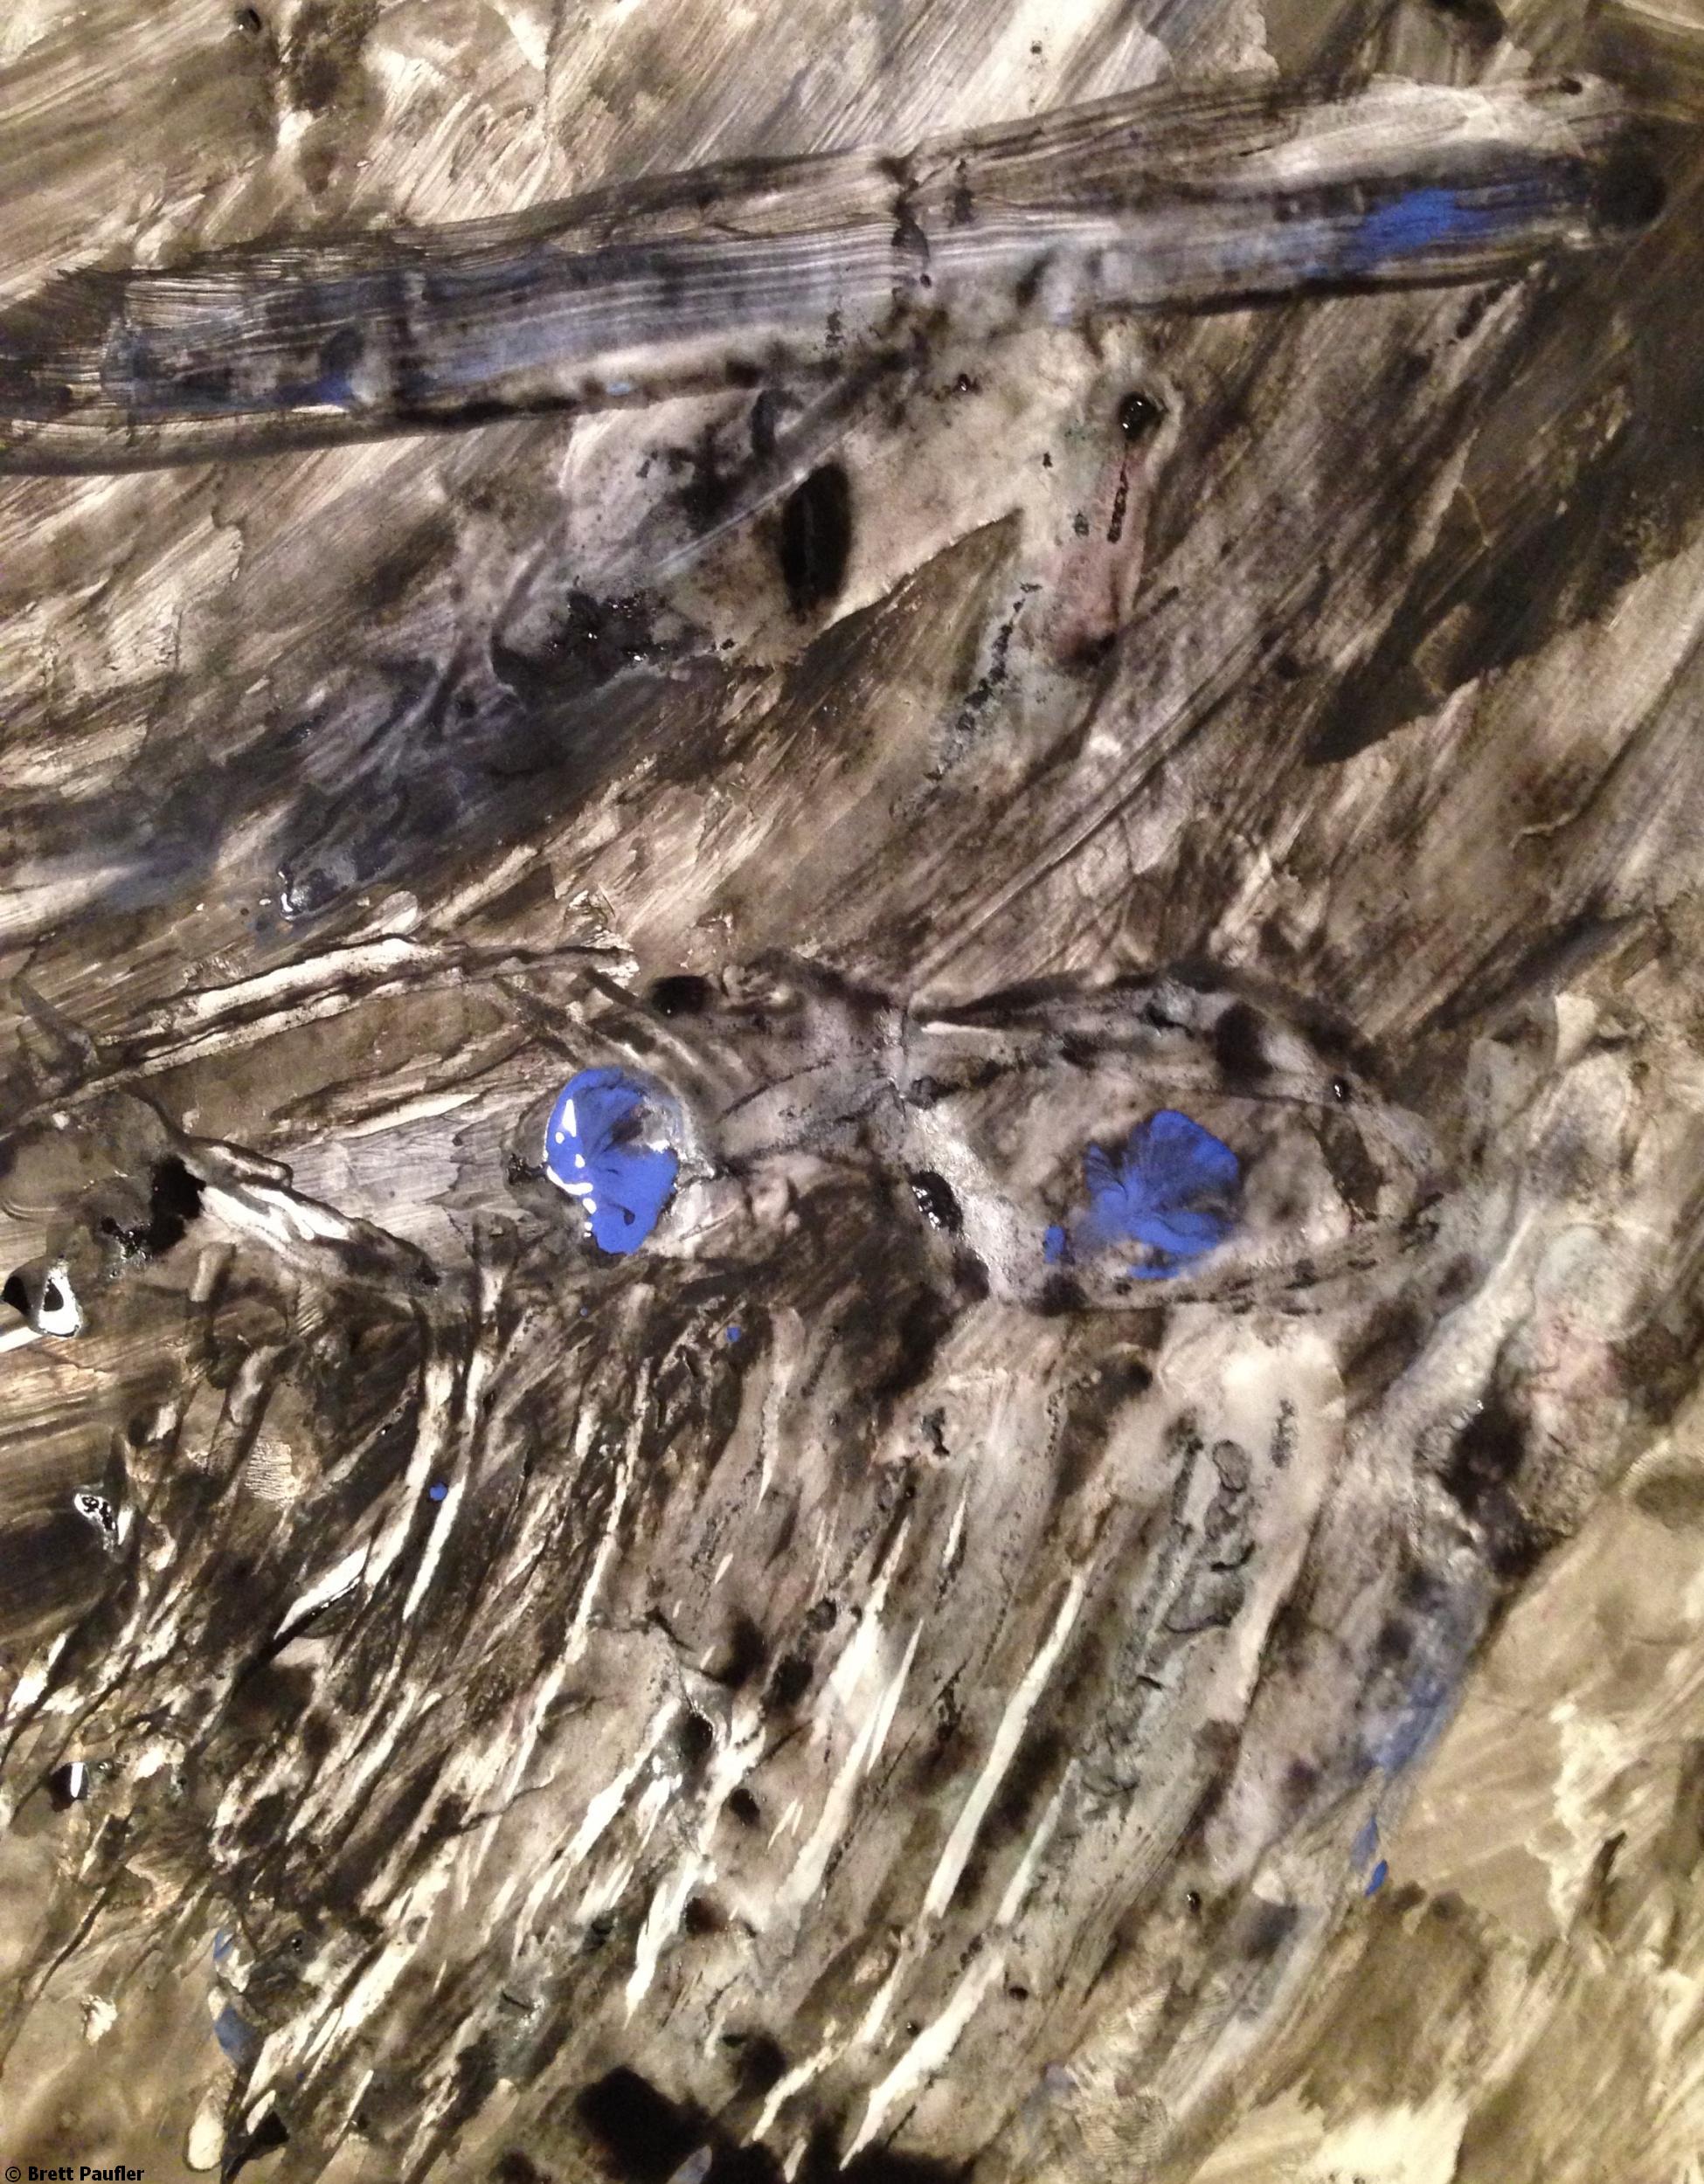 A study in black, the face is denoted by scraped paint, the movement of fingers, the eyes are blotches of blue